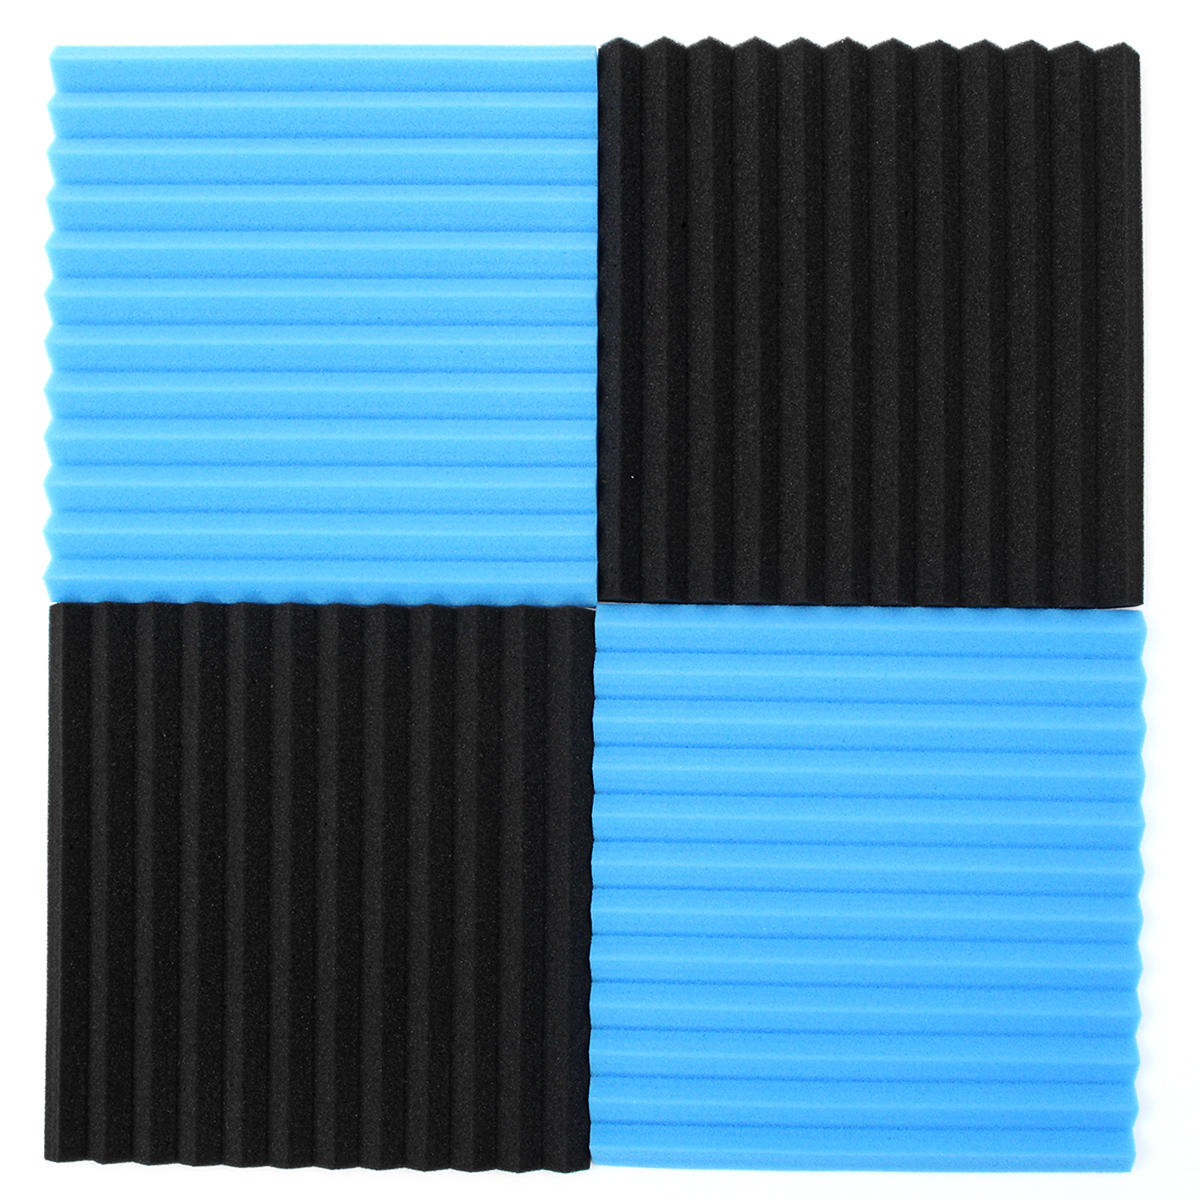 Find 12PCS Soundproofing Foam Tiles Kits Black +Blue for Sale on Gipsybee.com with cryptocurrencies